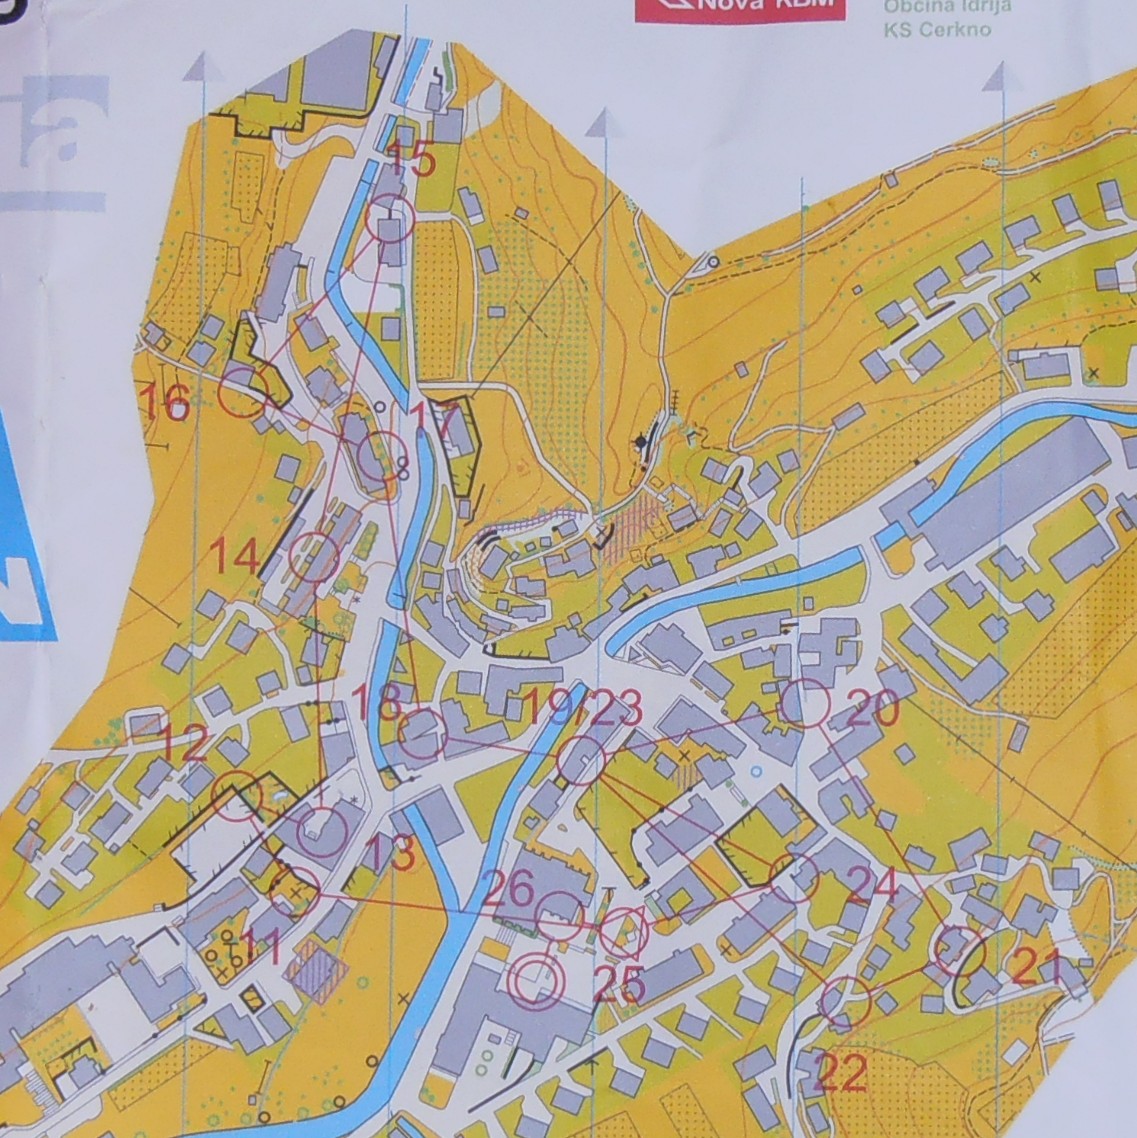 Cerkno Cup Sprint Map2 (18.08.2012)